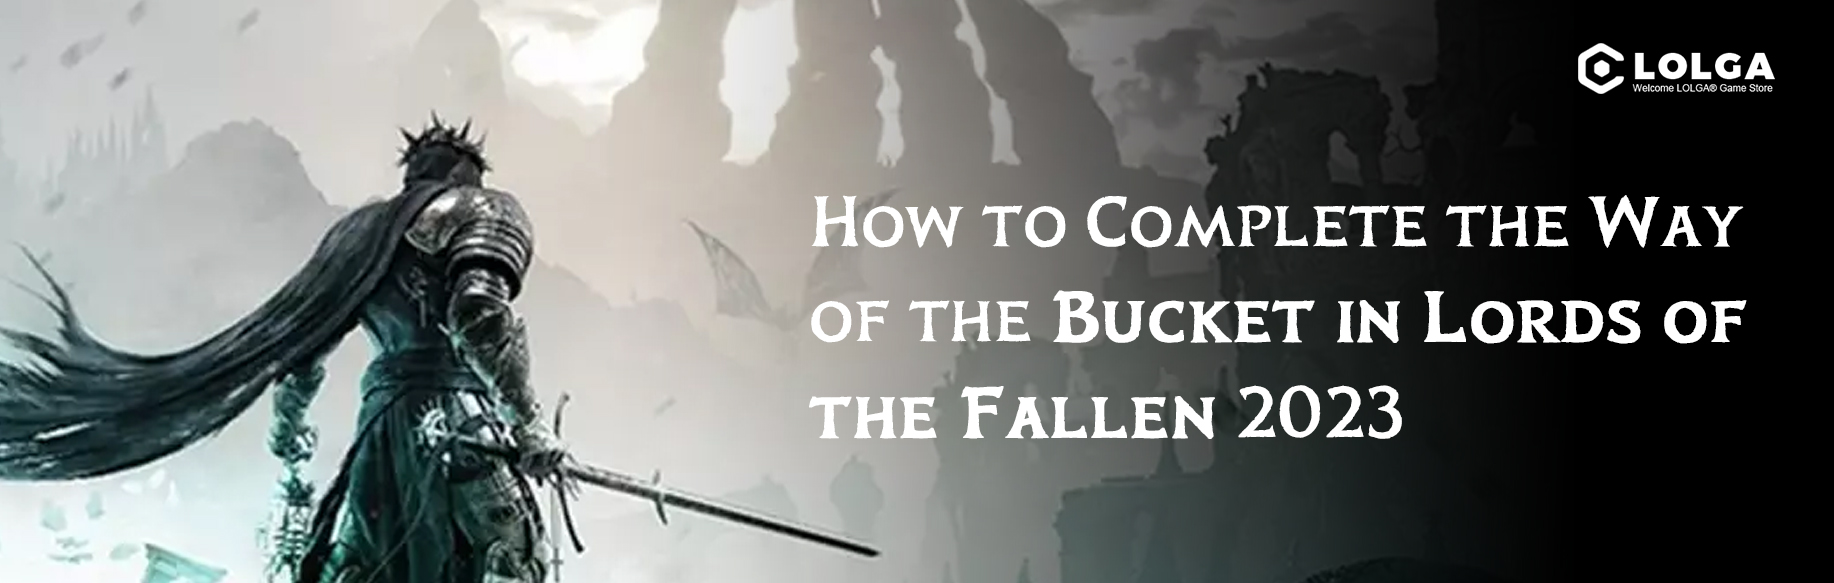 How to Complete the Way of the Bucket in Lords of the Fallen 2023